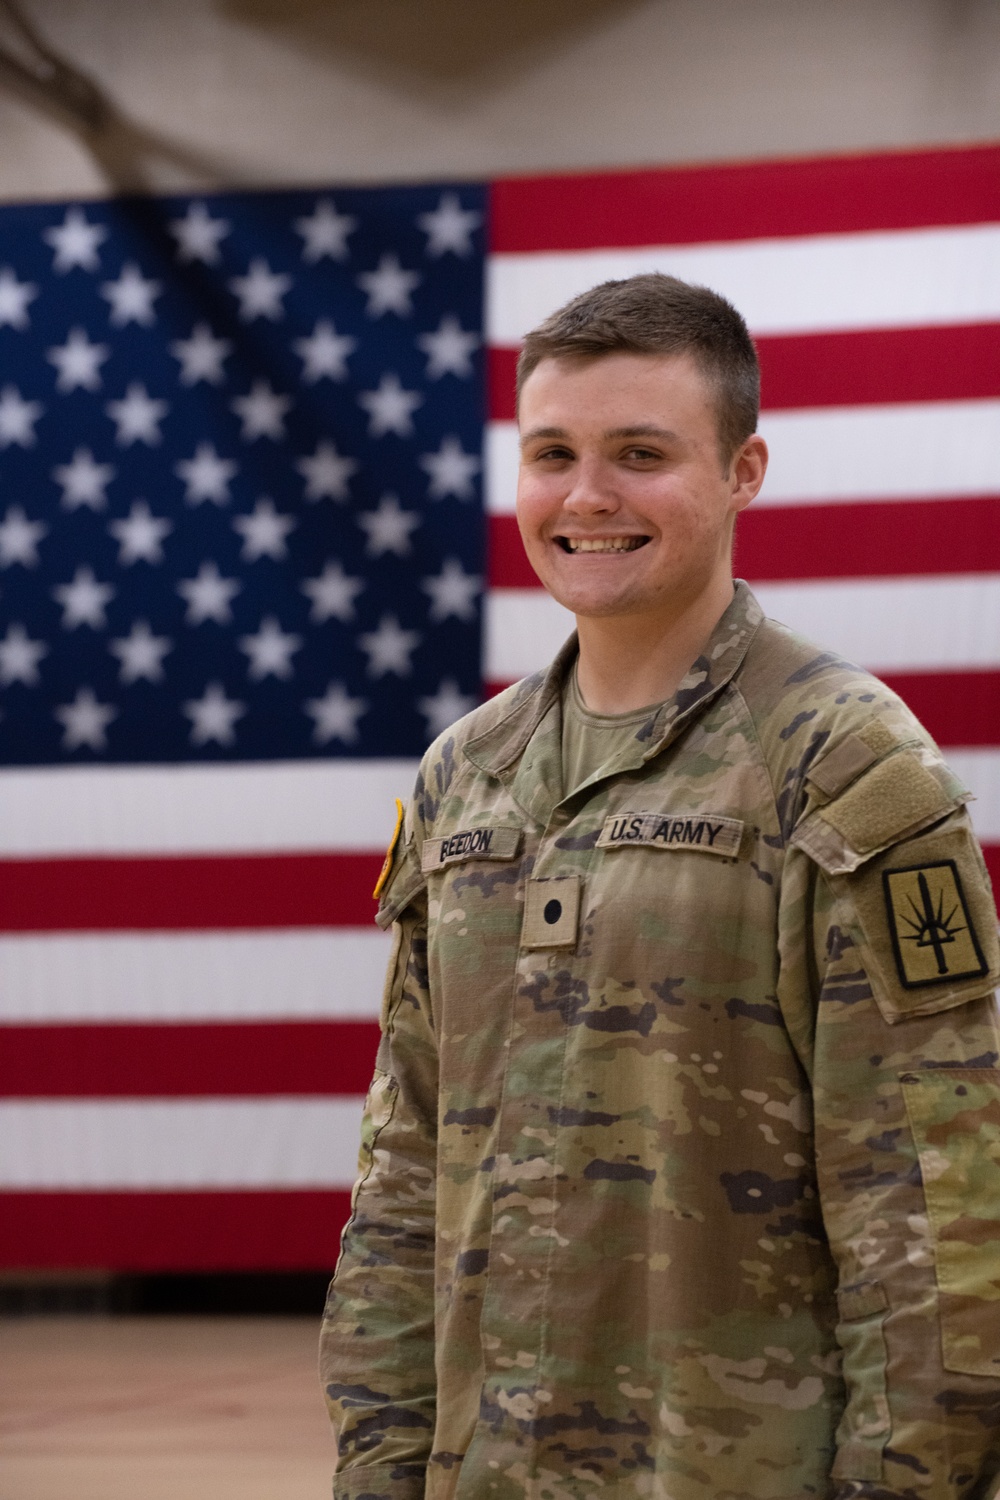 DVIDS - News - NY Army Guard Soldier serves as MP and trains to be an ...